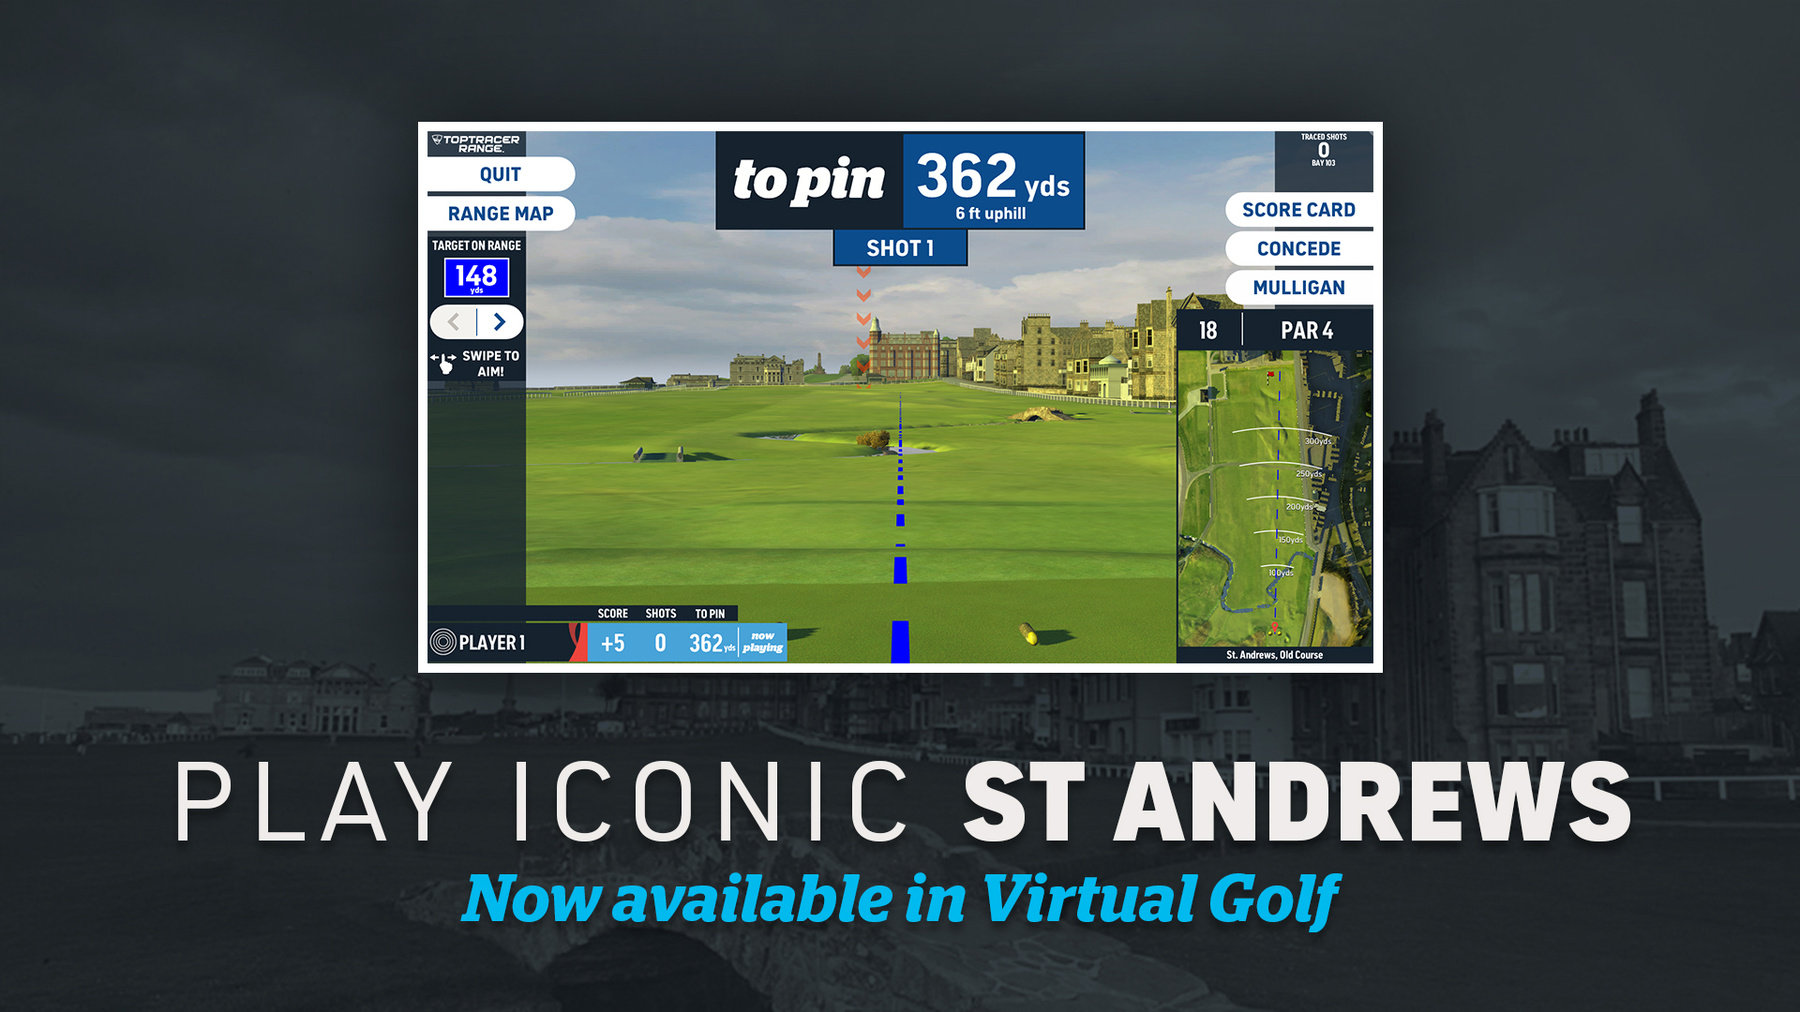 tg-ttr-st-andrews-in-game-graphic-1920×1080